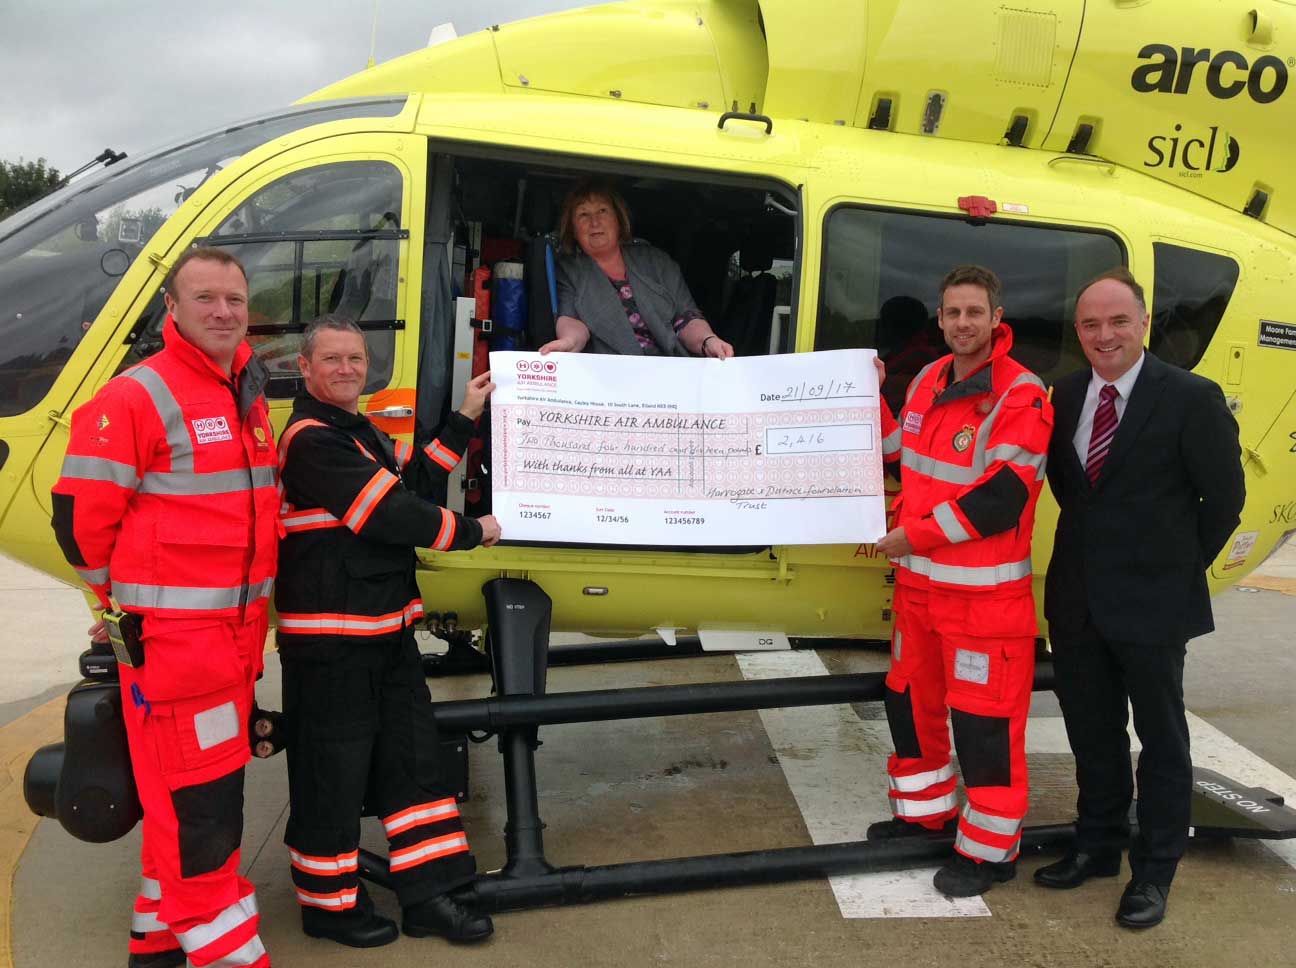 left to right are: Dr Jez Pinnell (YAA Doctor), Darren James (YAA Paramedic), Hillary Levitt (HDFT Trade Union colleagues representative and Unison Branch Secretary), Cpt Harry O’Neil (YAA Pilot).